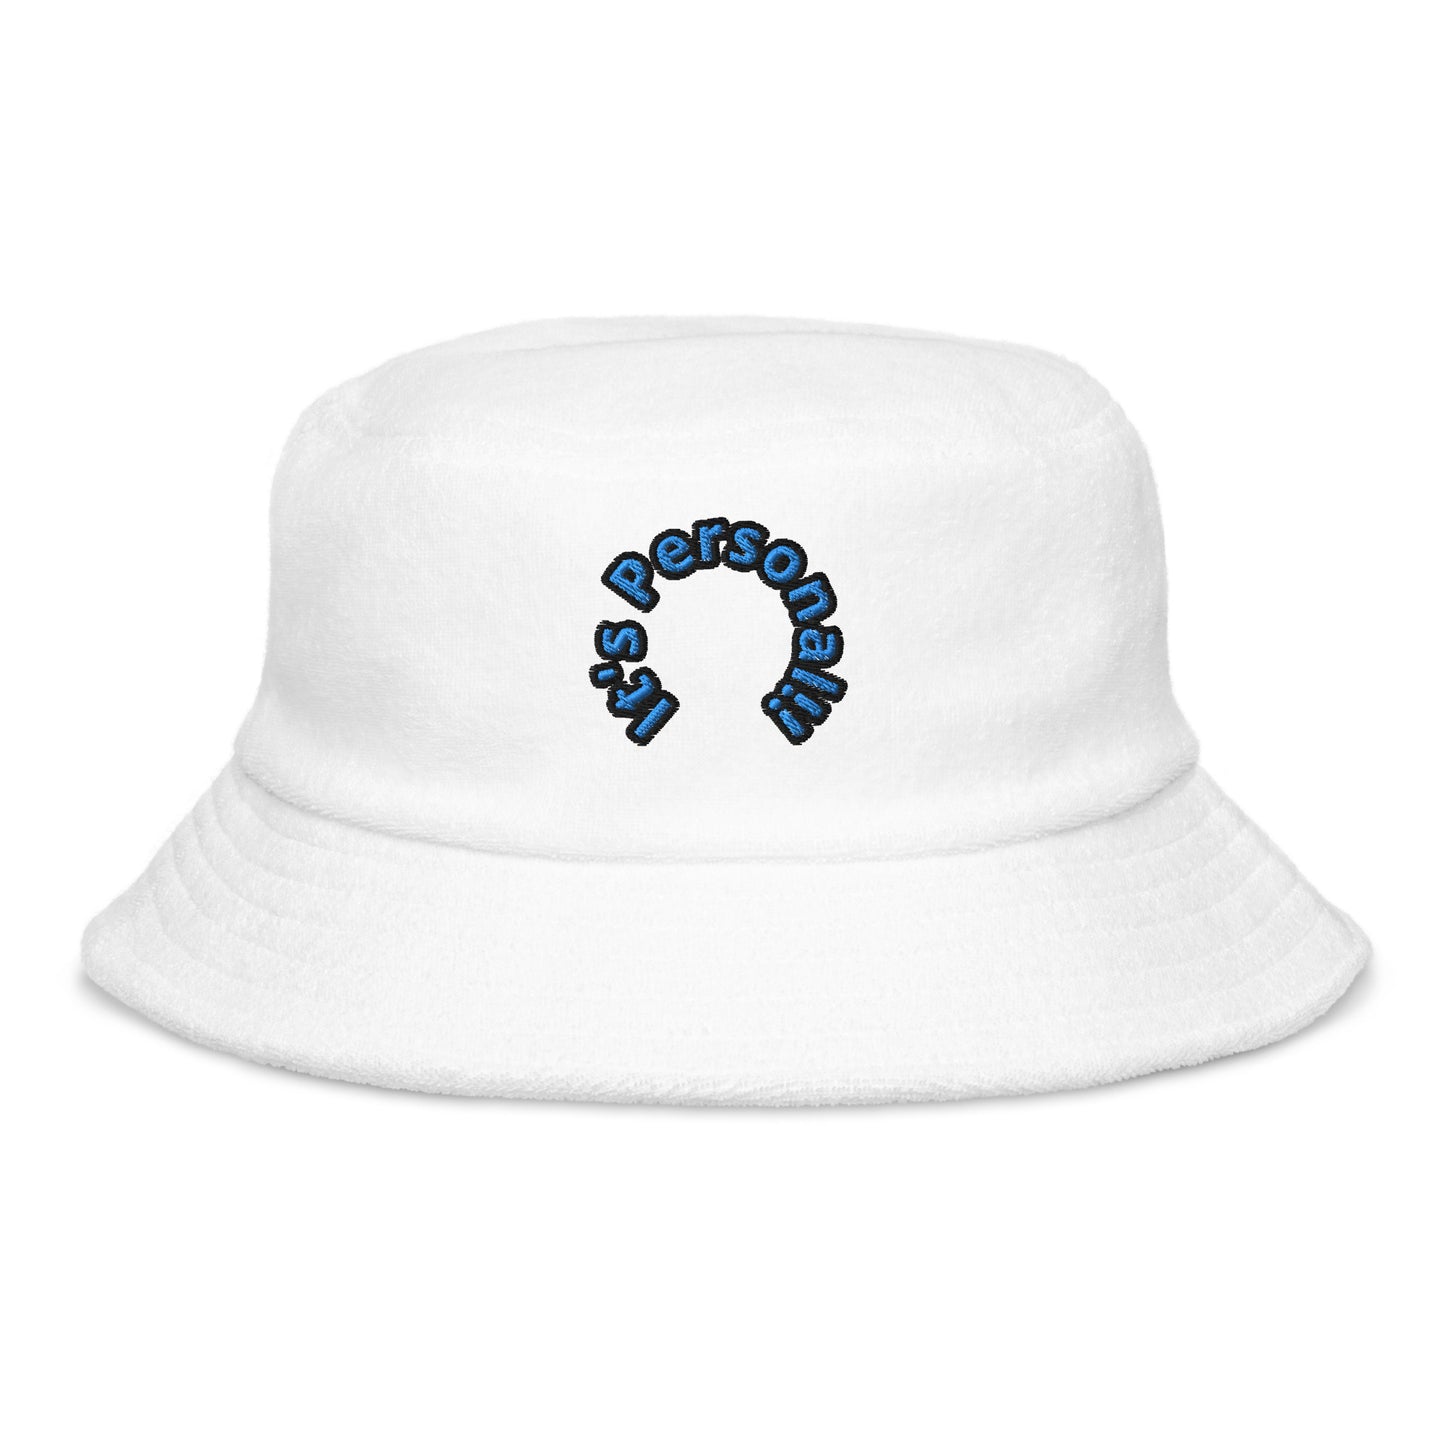 It's Personal!! Terry Cloth Bucket Hat